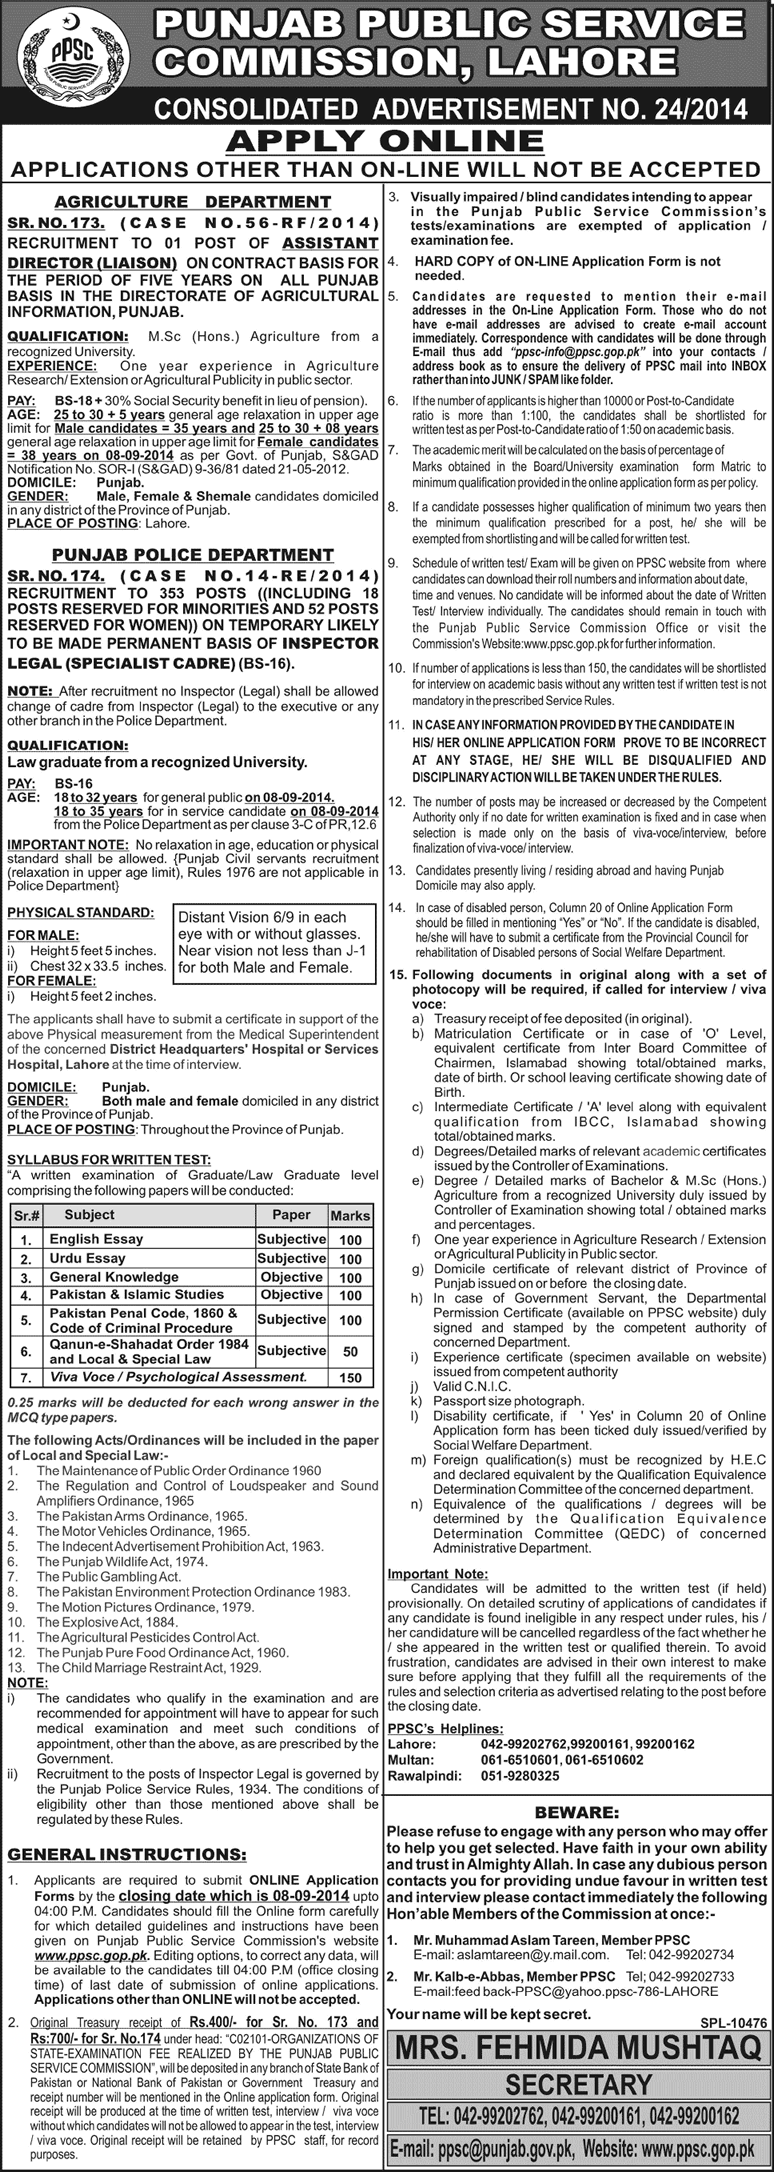 PPSC Jobs August 2014 for Inspector Legal in Punjab Police Department